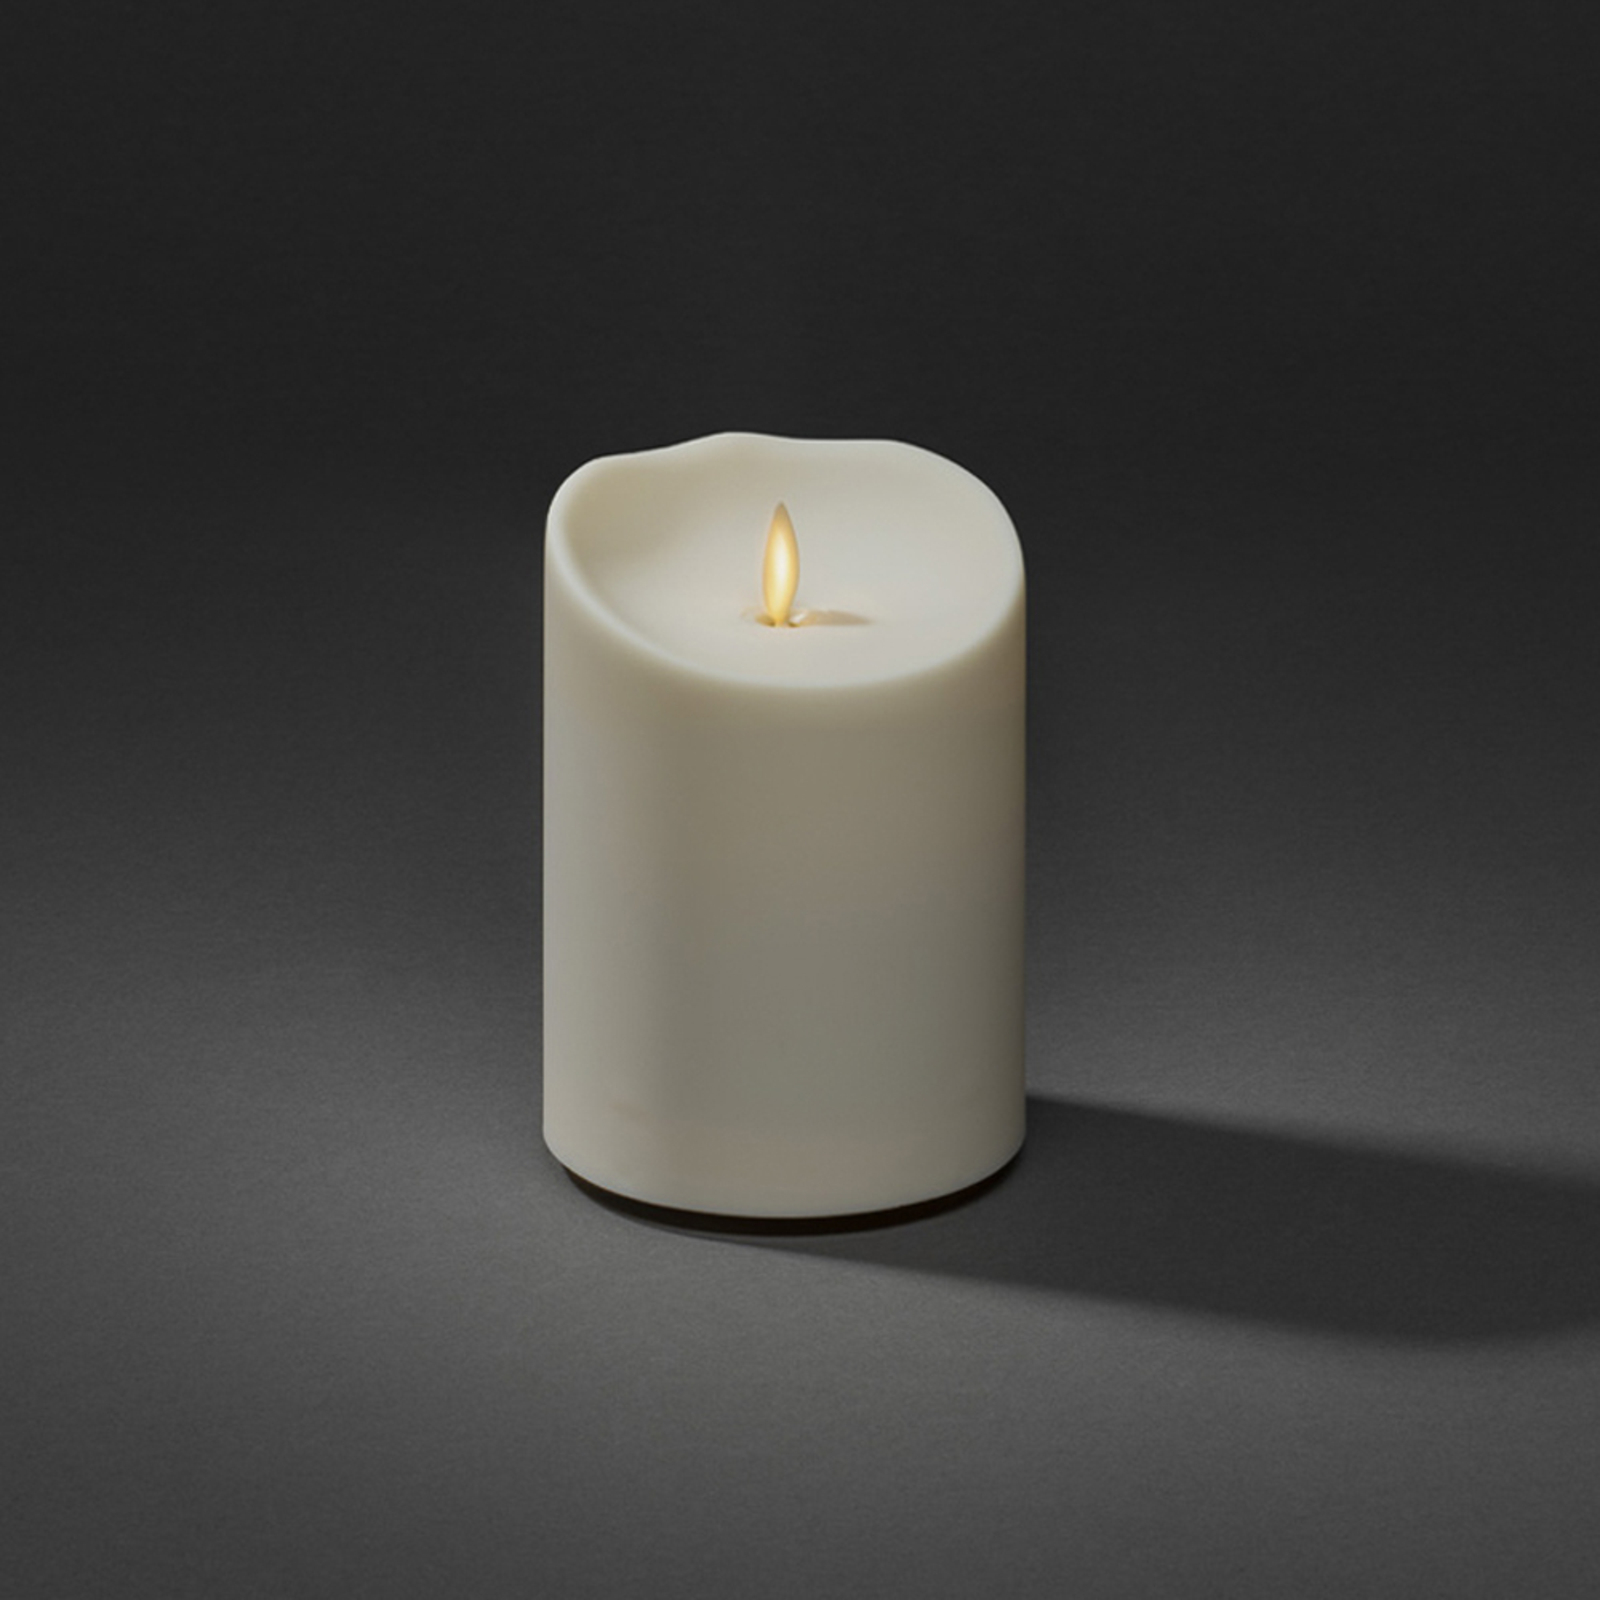 LED candle IP44 cream white melted height 14cm